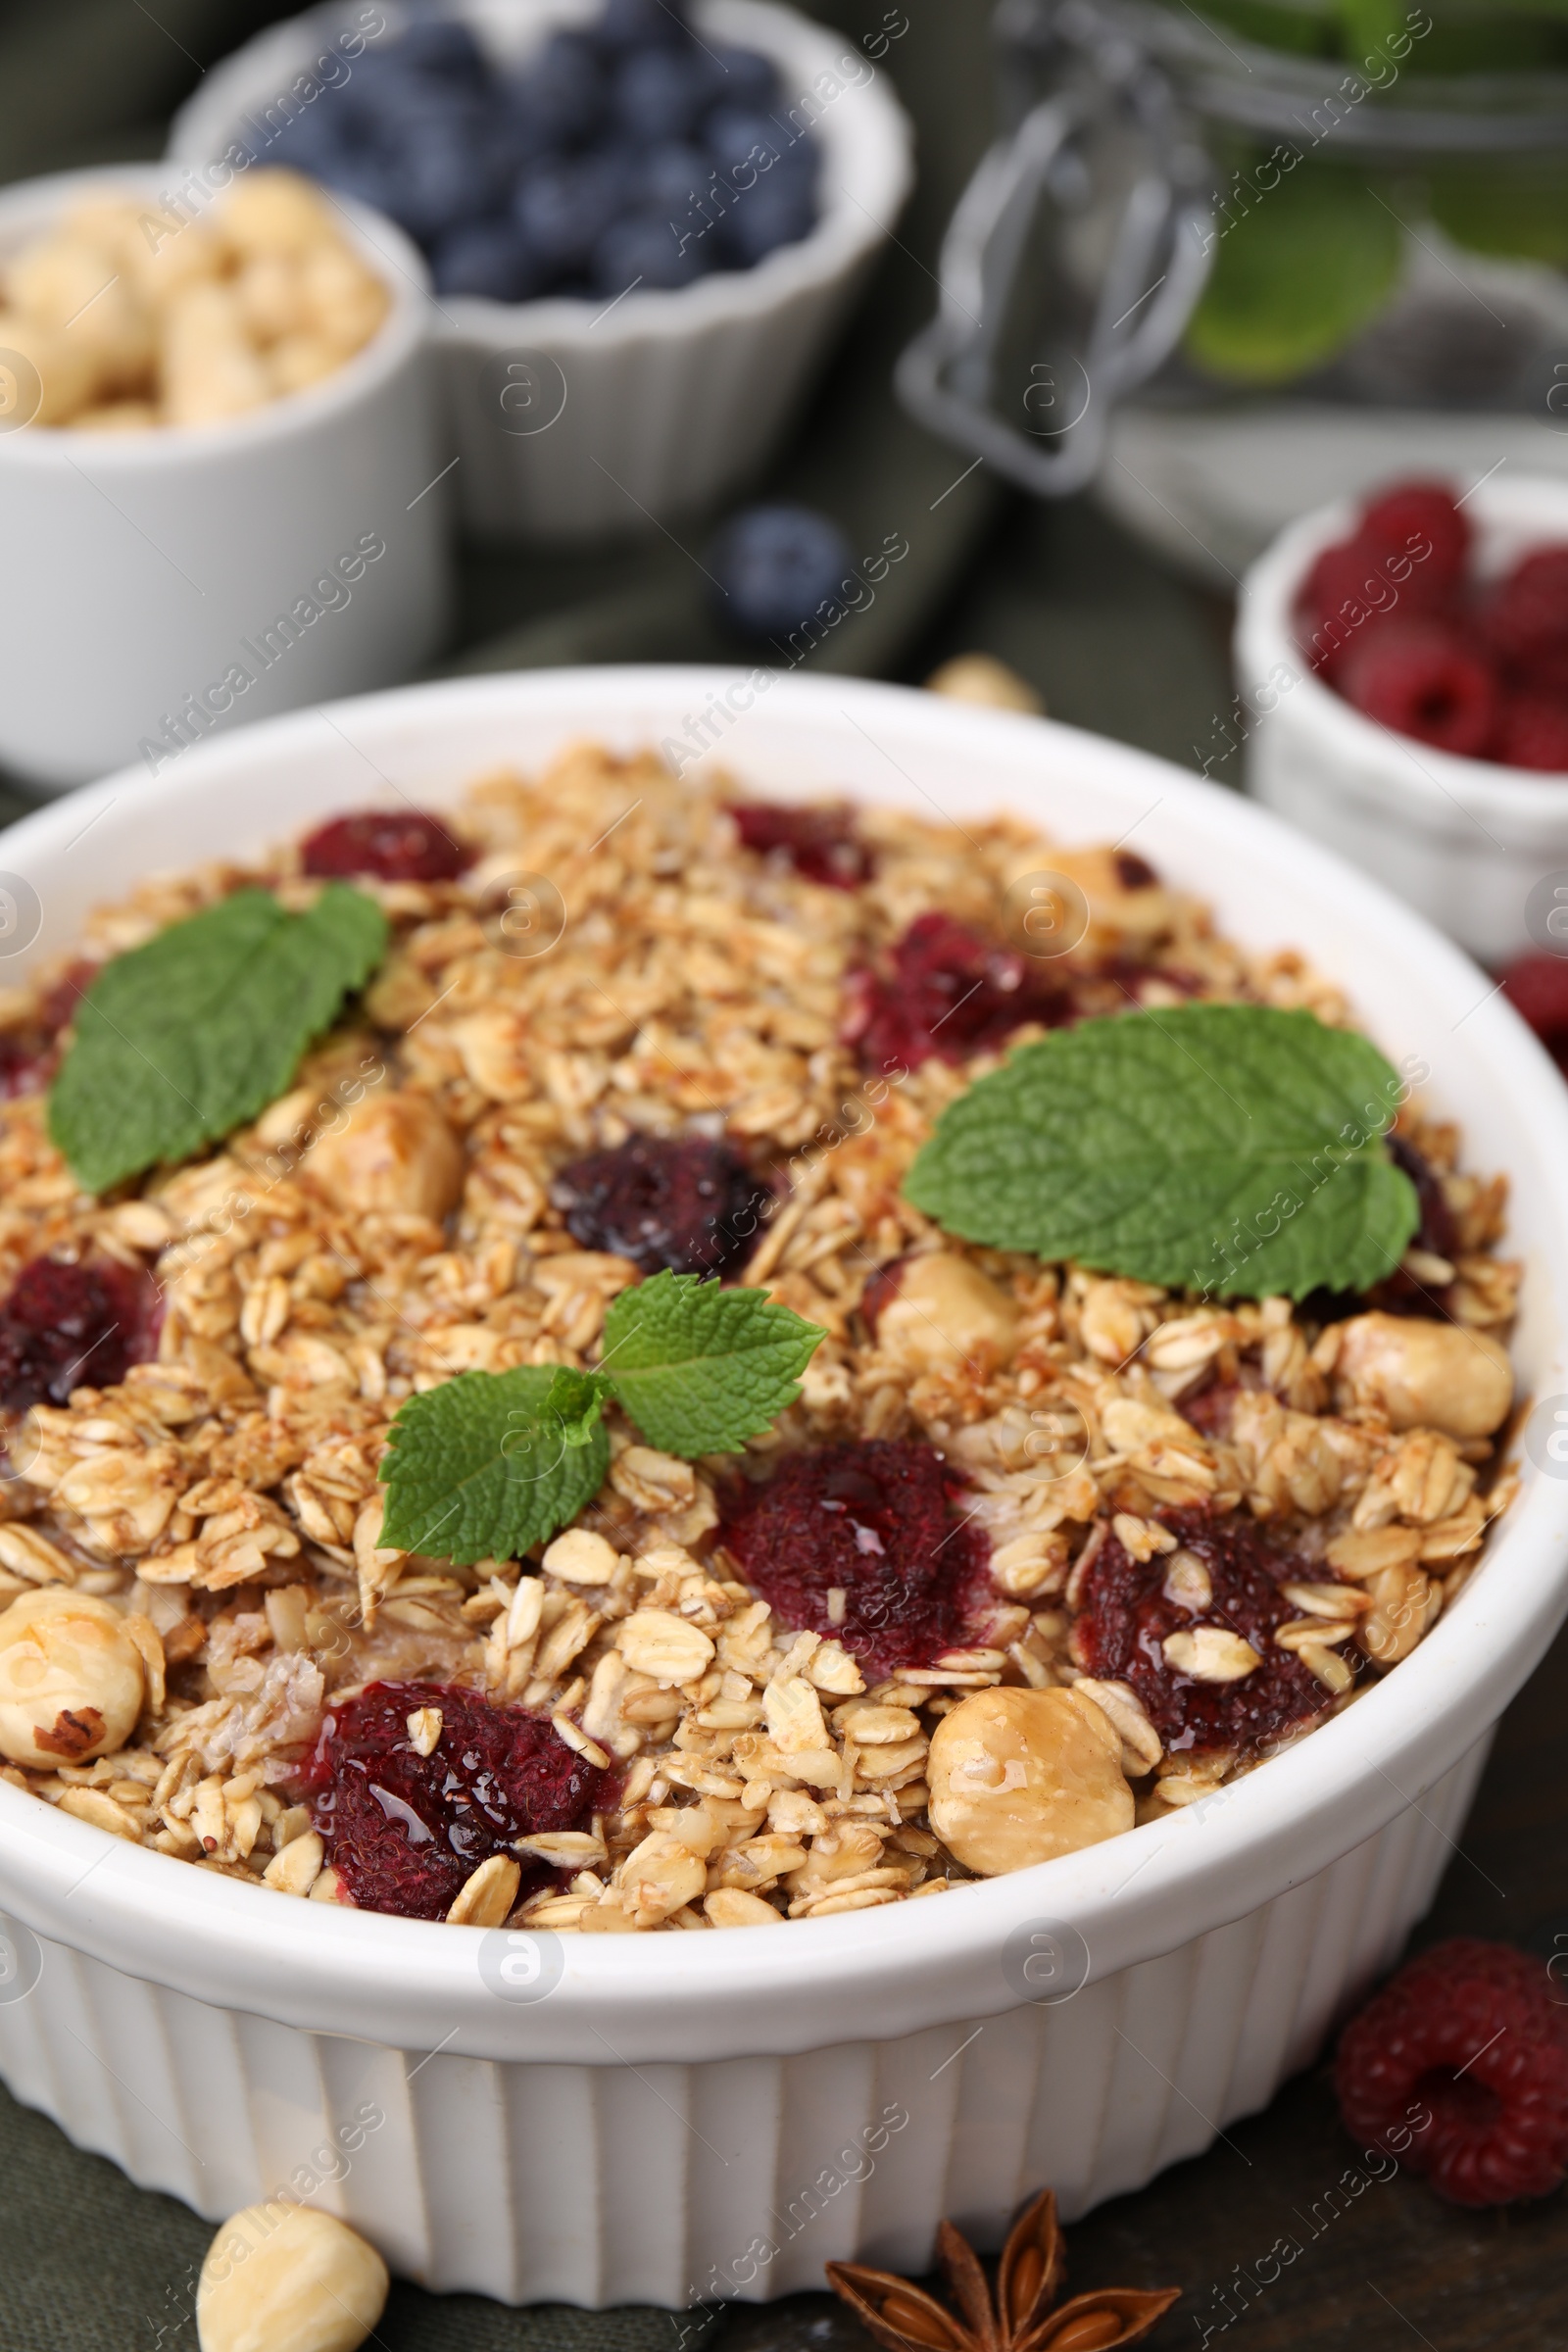 Photo of Tasty baked oatmeal with berries and nuts on wooden table, closeup